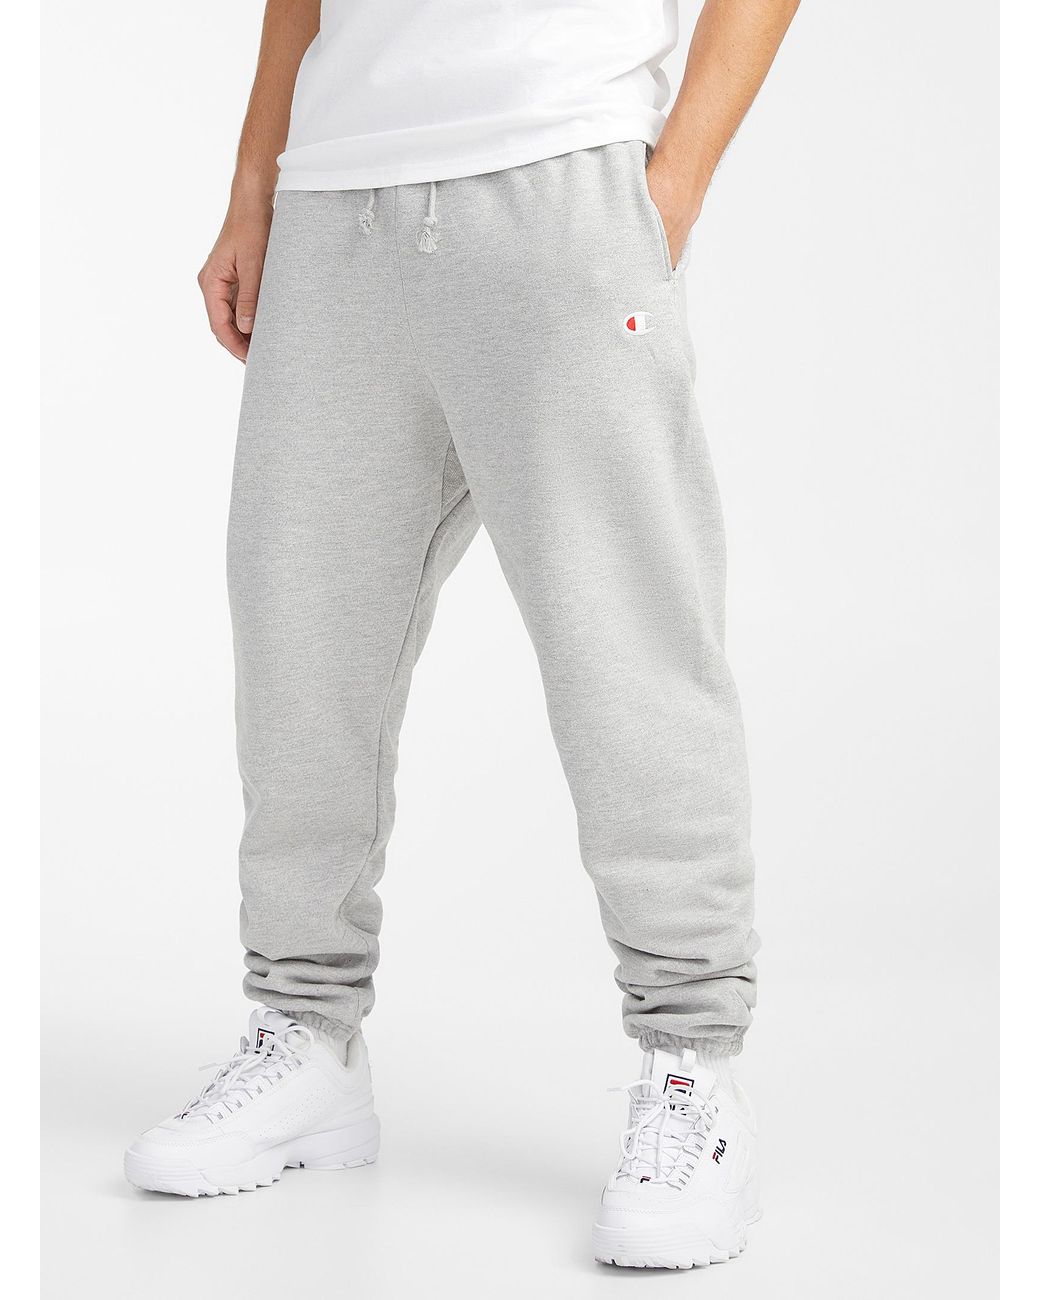 Champion Cotton Reverse Weave Loose joggers in Grey (Gray) for Men - Lyst